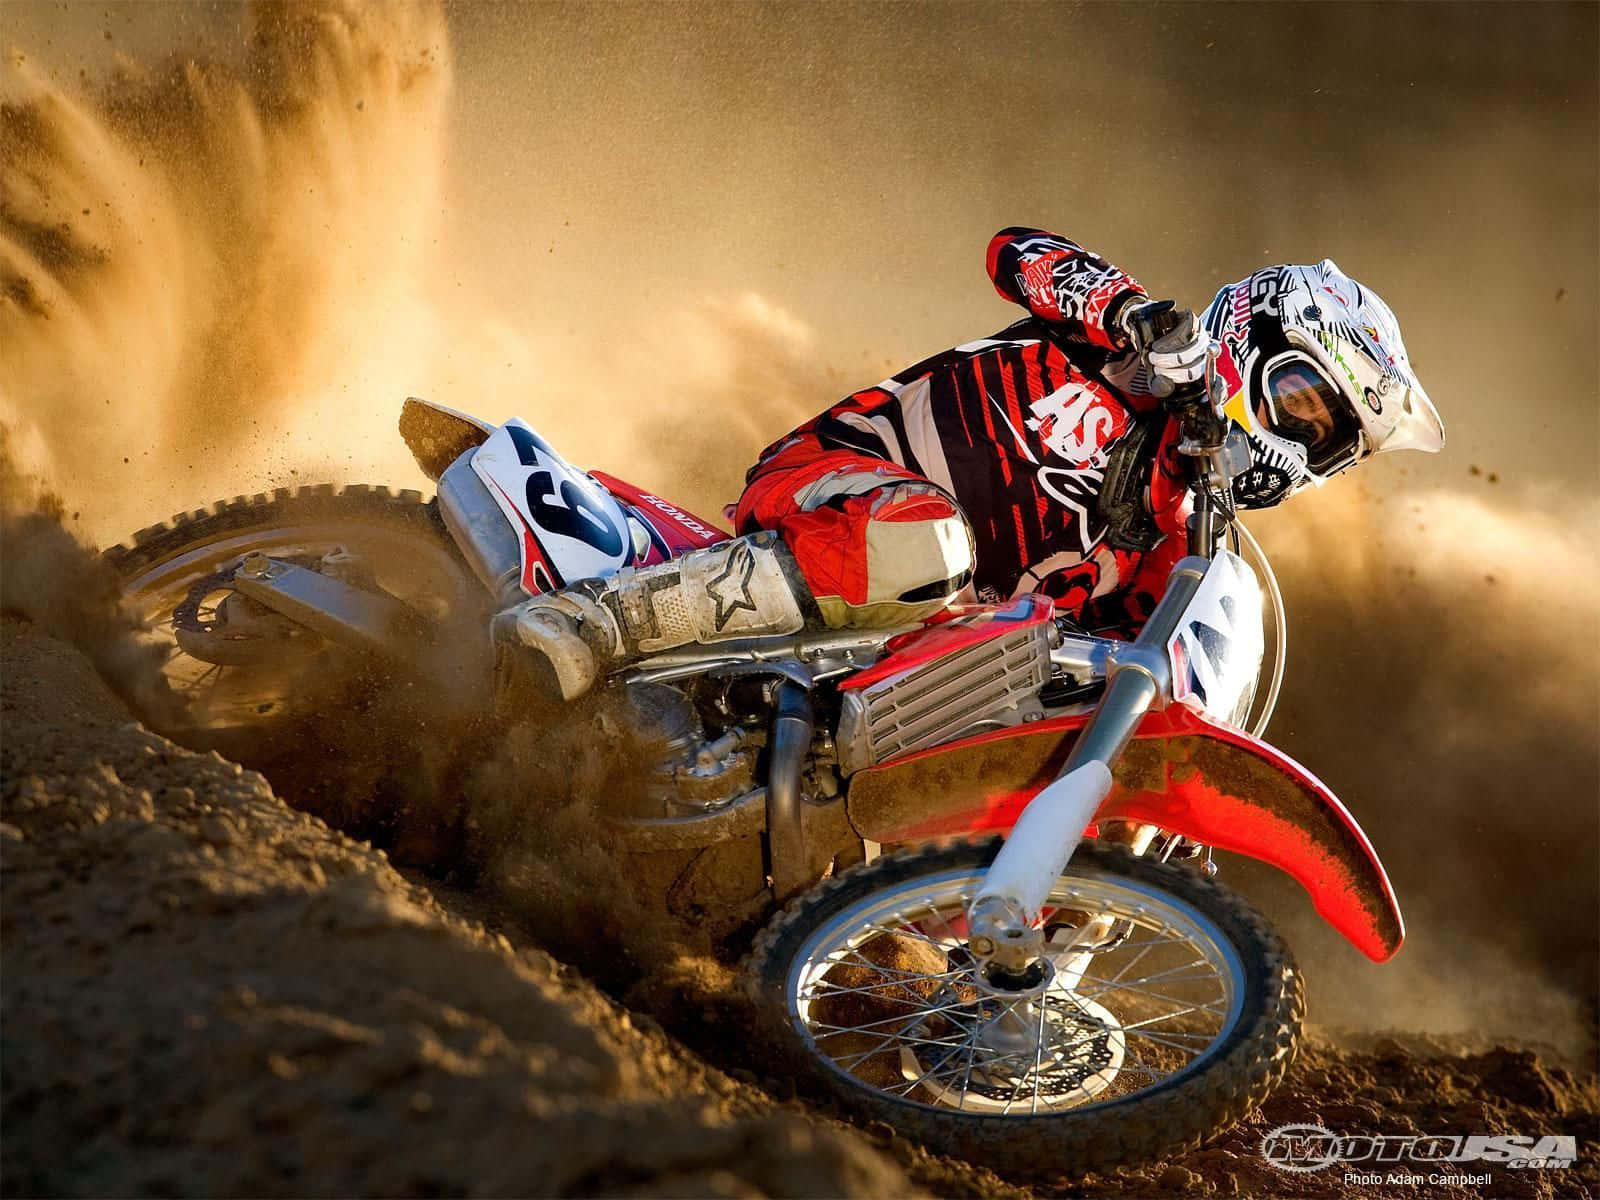 "Hop on this Honda Dirt Bike and hit the trails!" Wallpaper